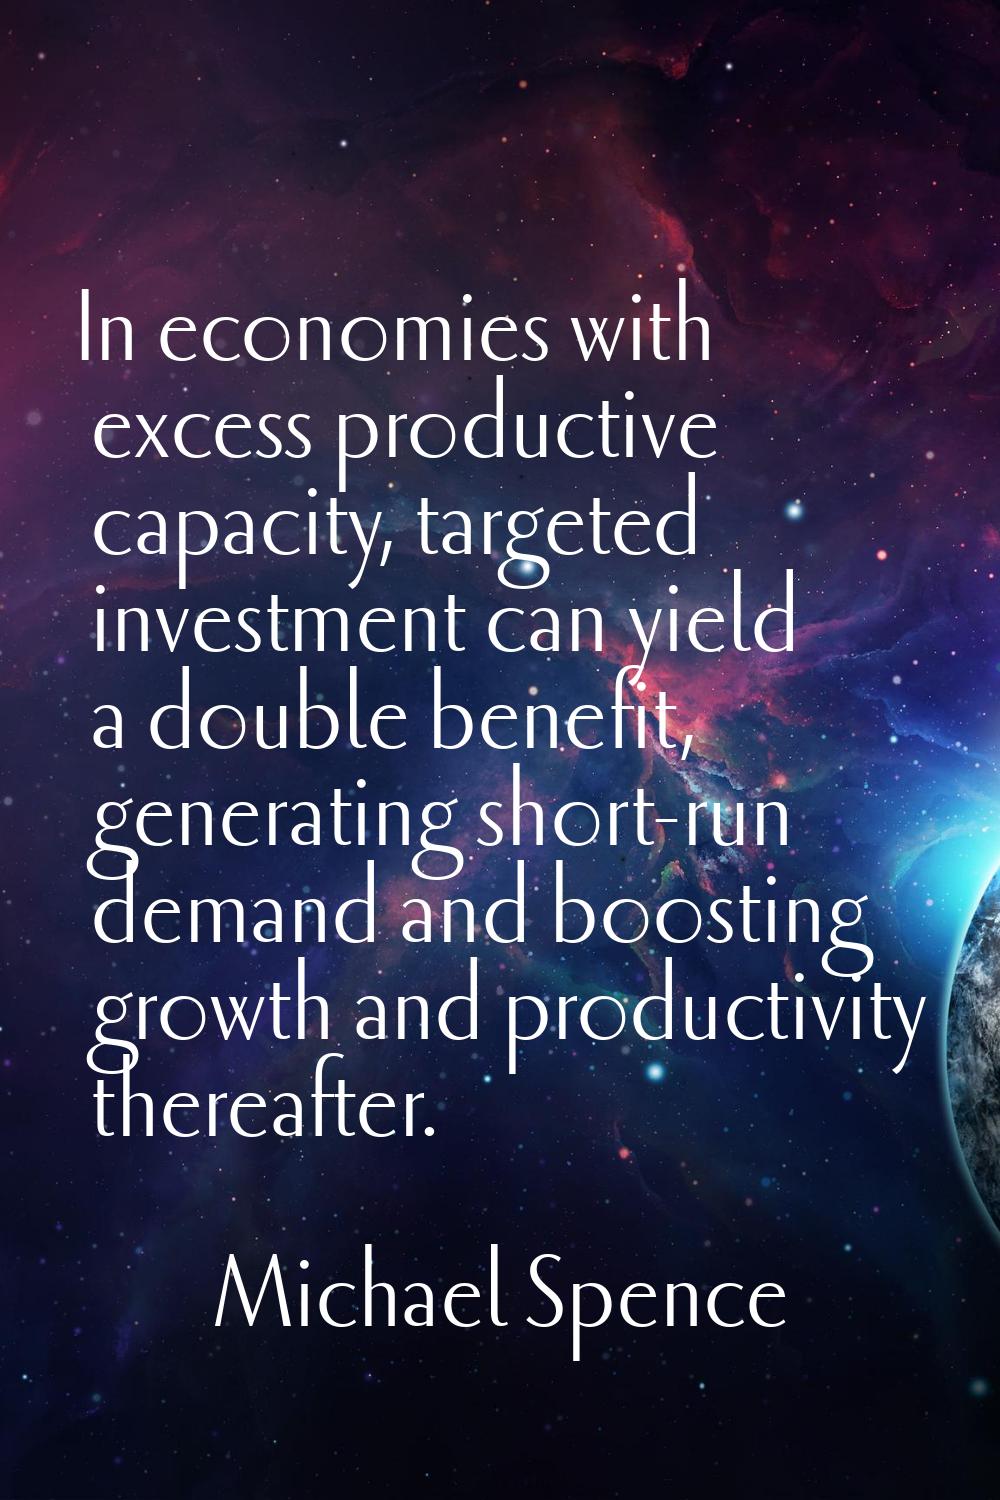 In economies with excess productive capacity, targeted investment can yield a double benefit, gener